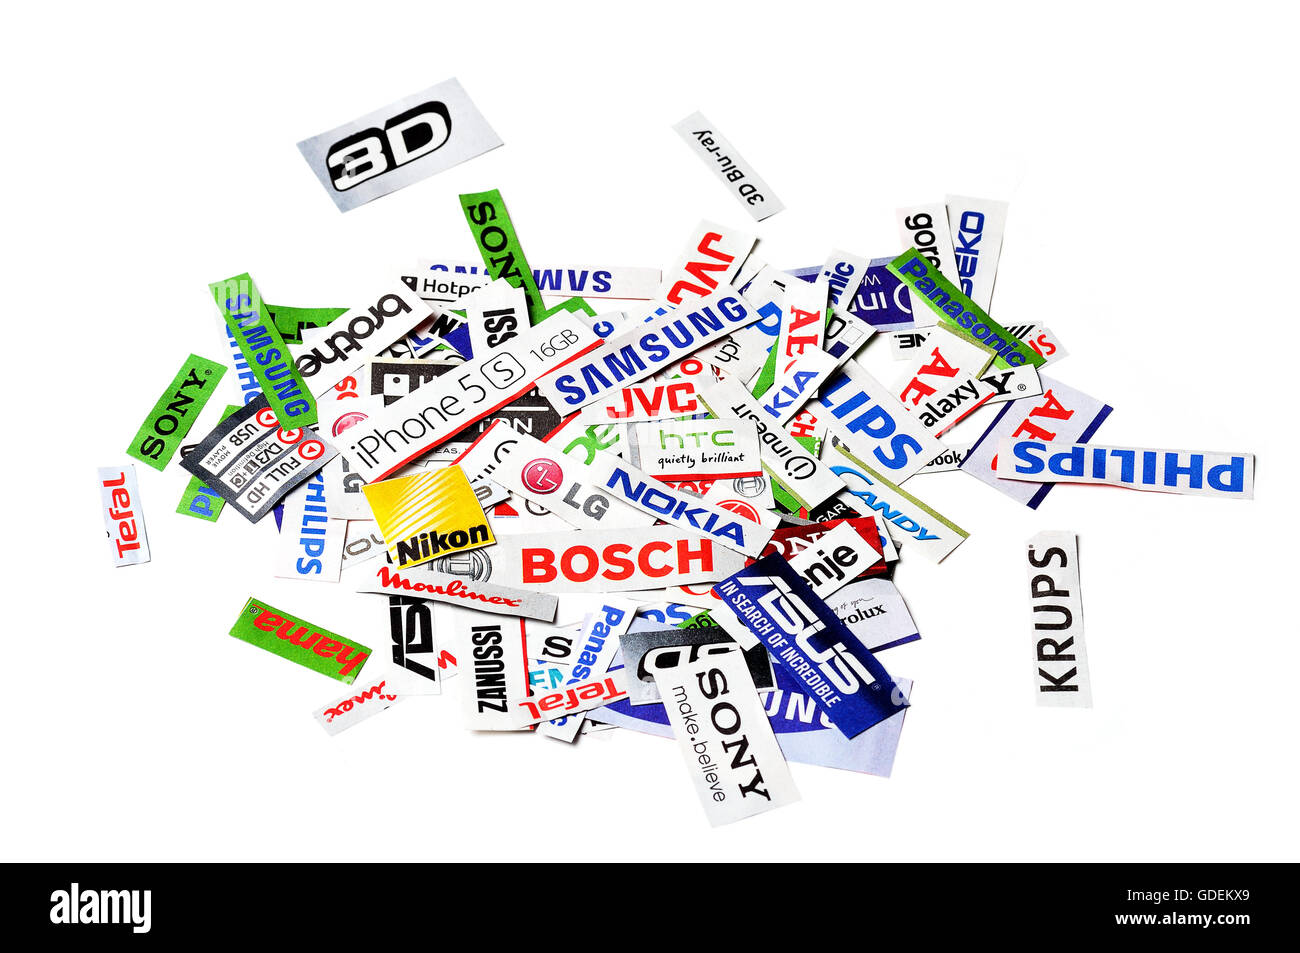 A grungy, grainy  collage made up of newspaper clippings names of technology  brands Stock Photo